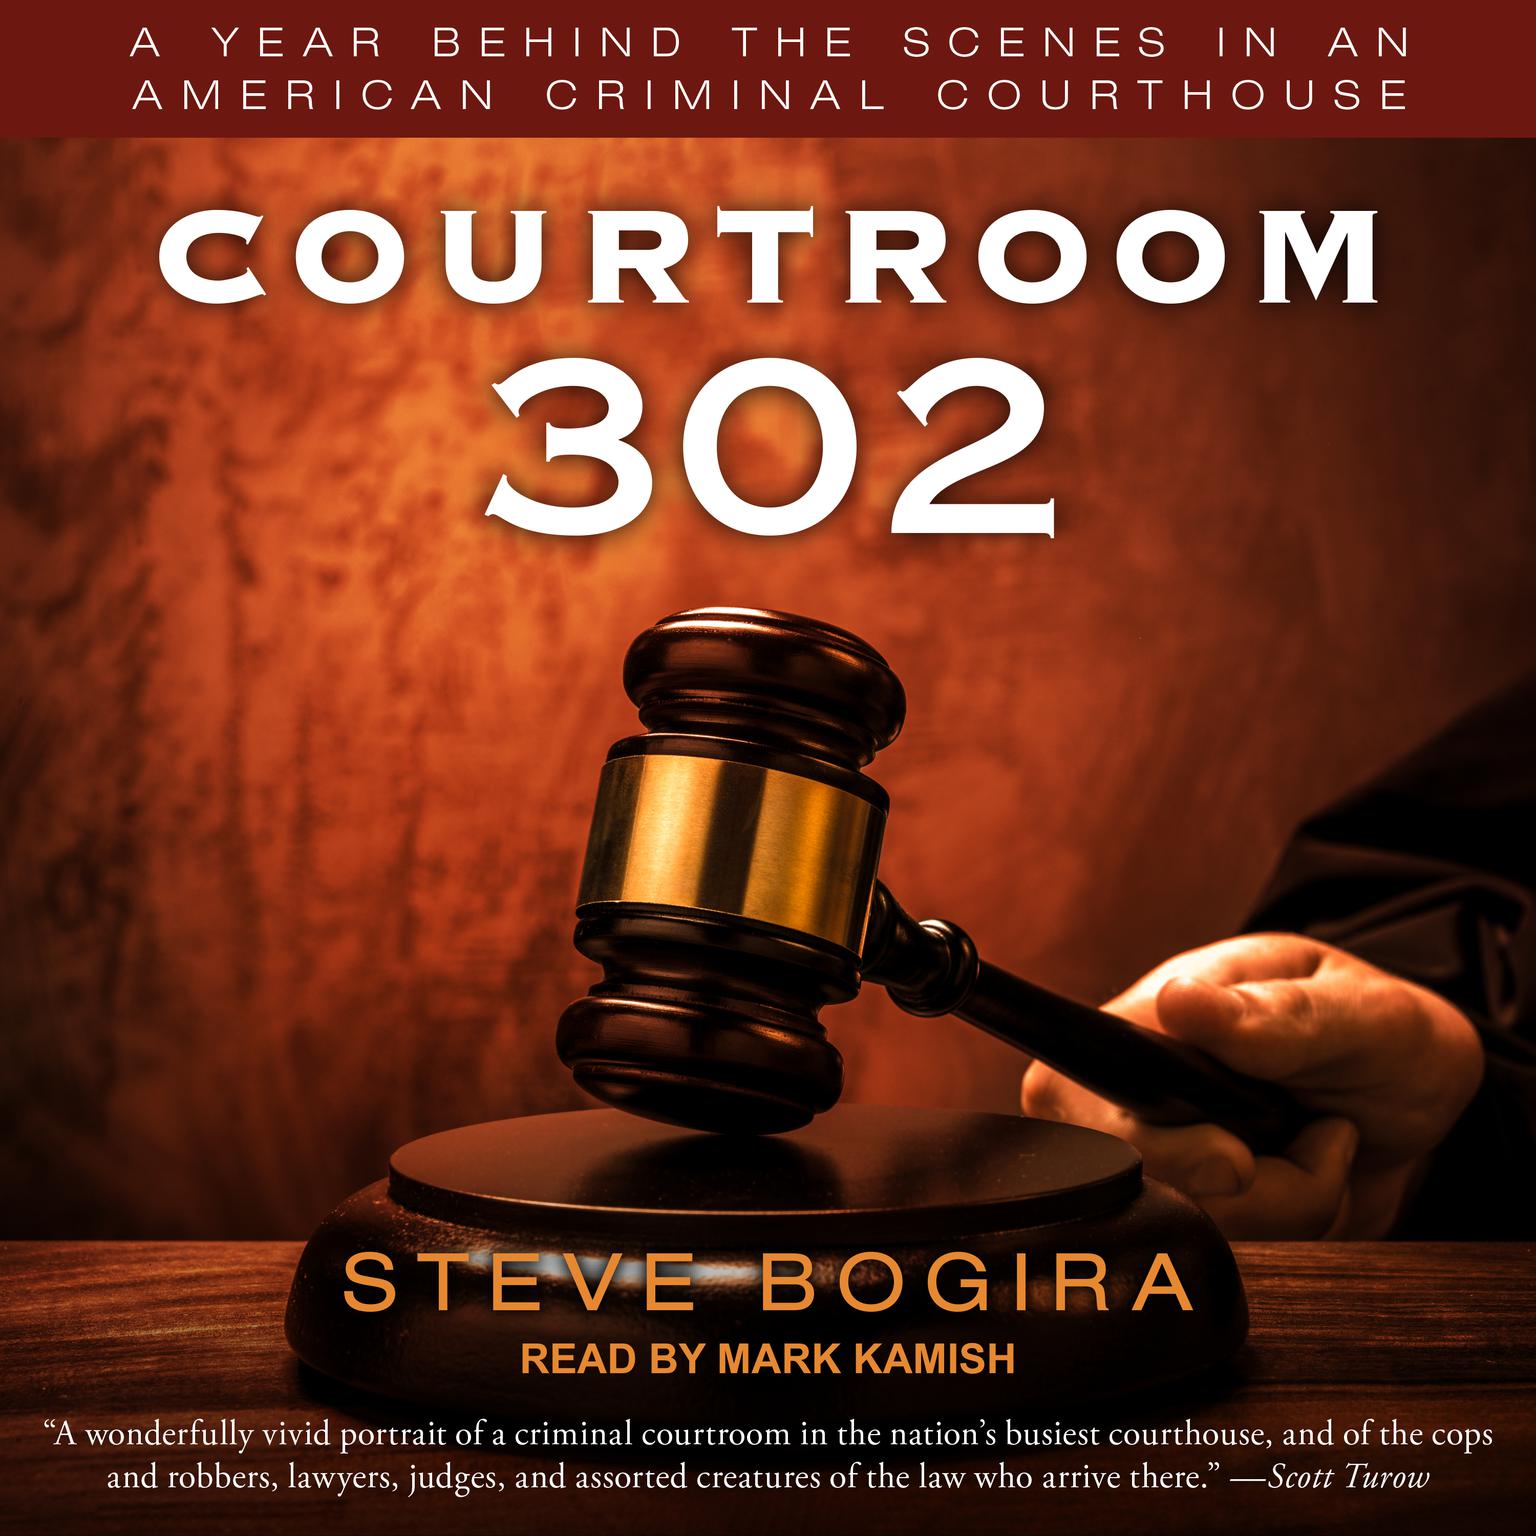 Courtroom 302: A Year Behind the Scenes in an American Criminal Courthouse Audiobook, by Steve Bogira